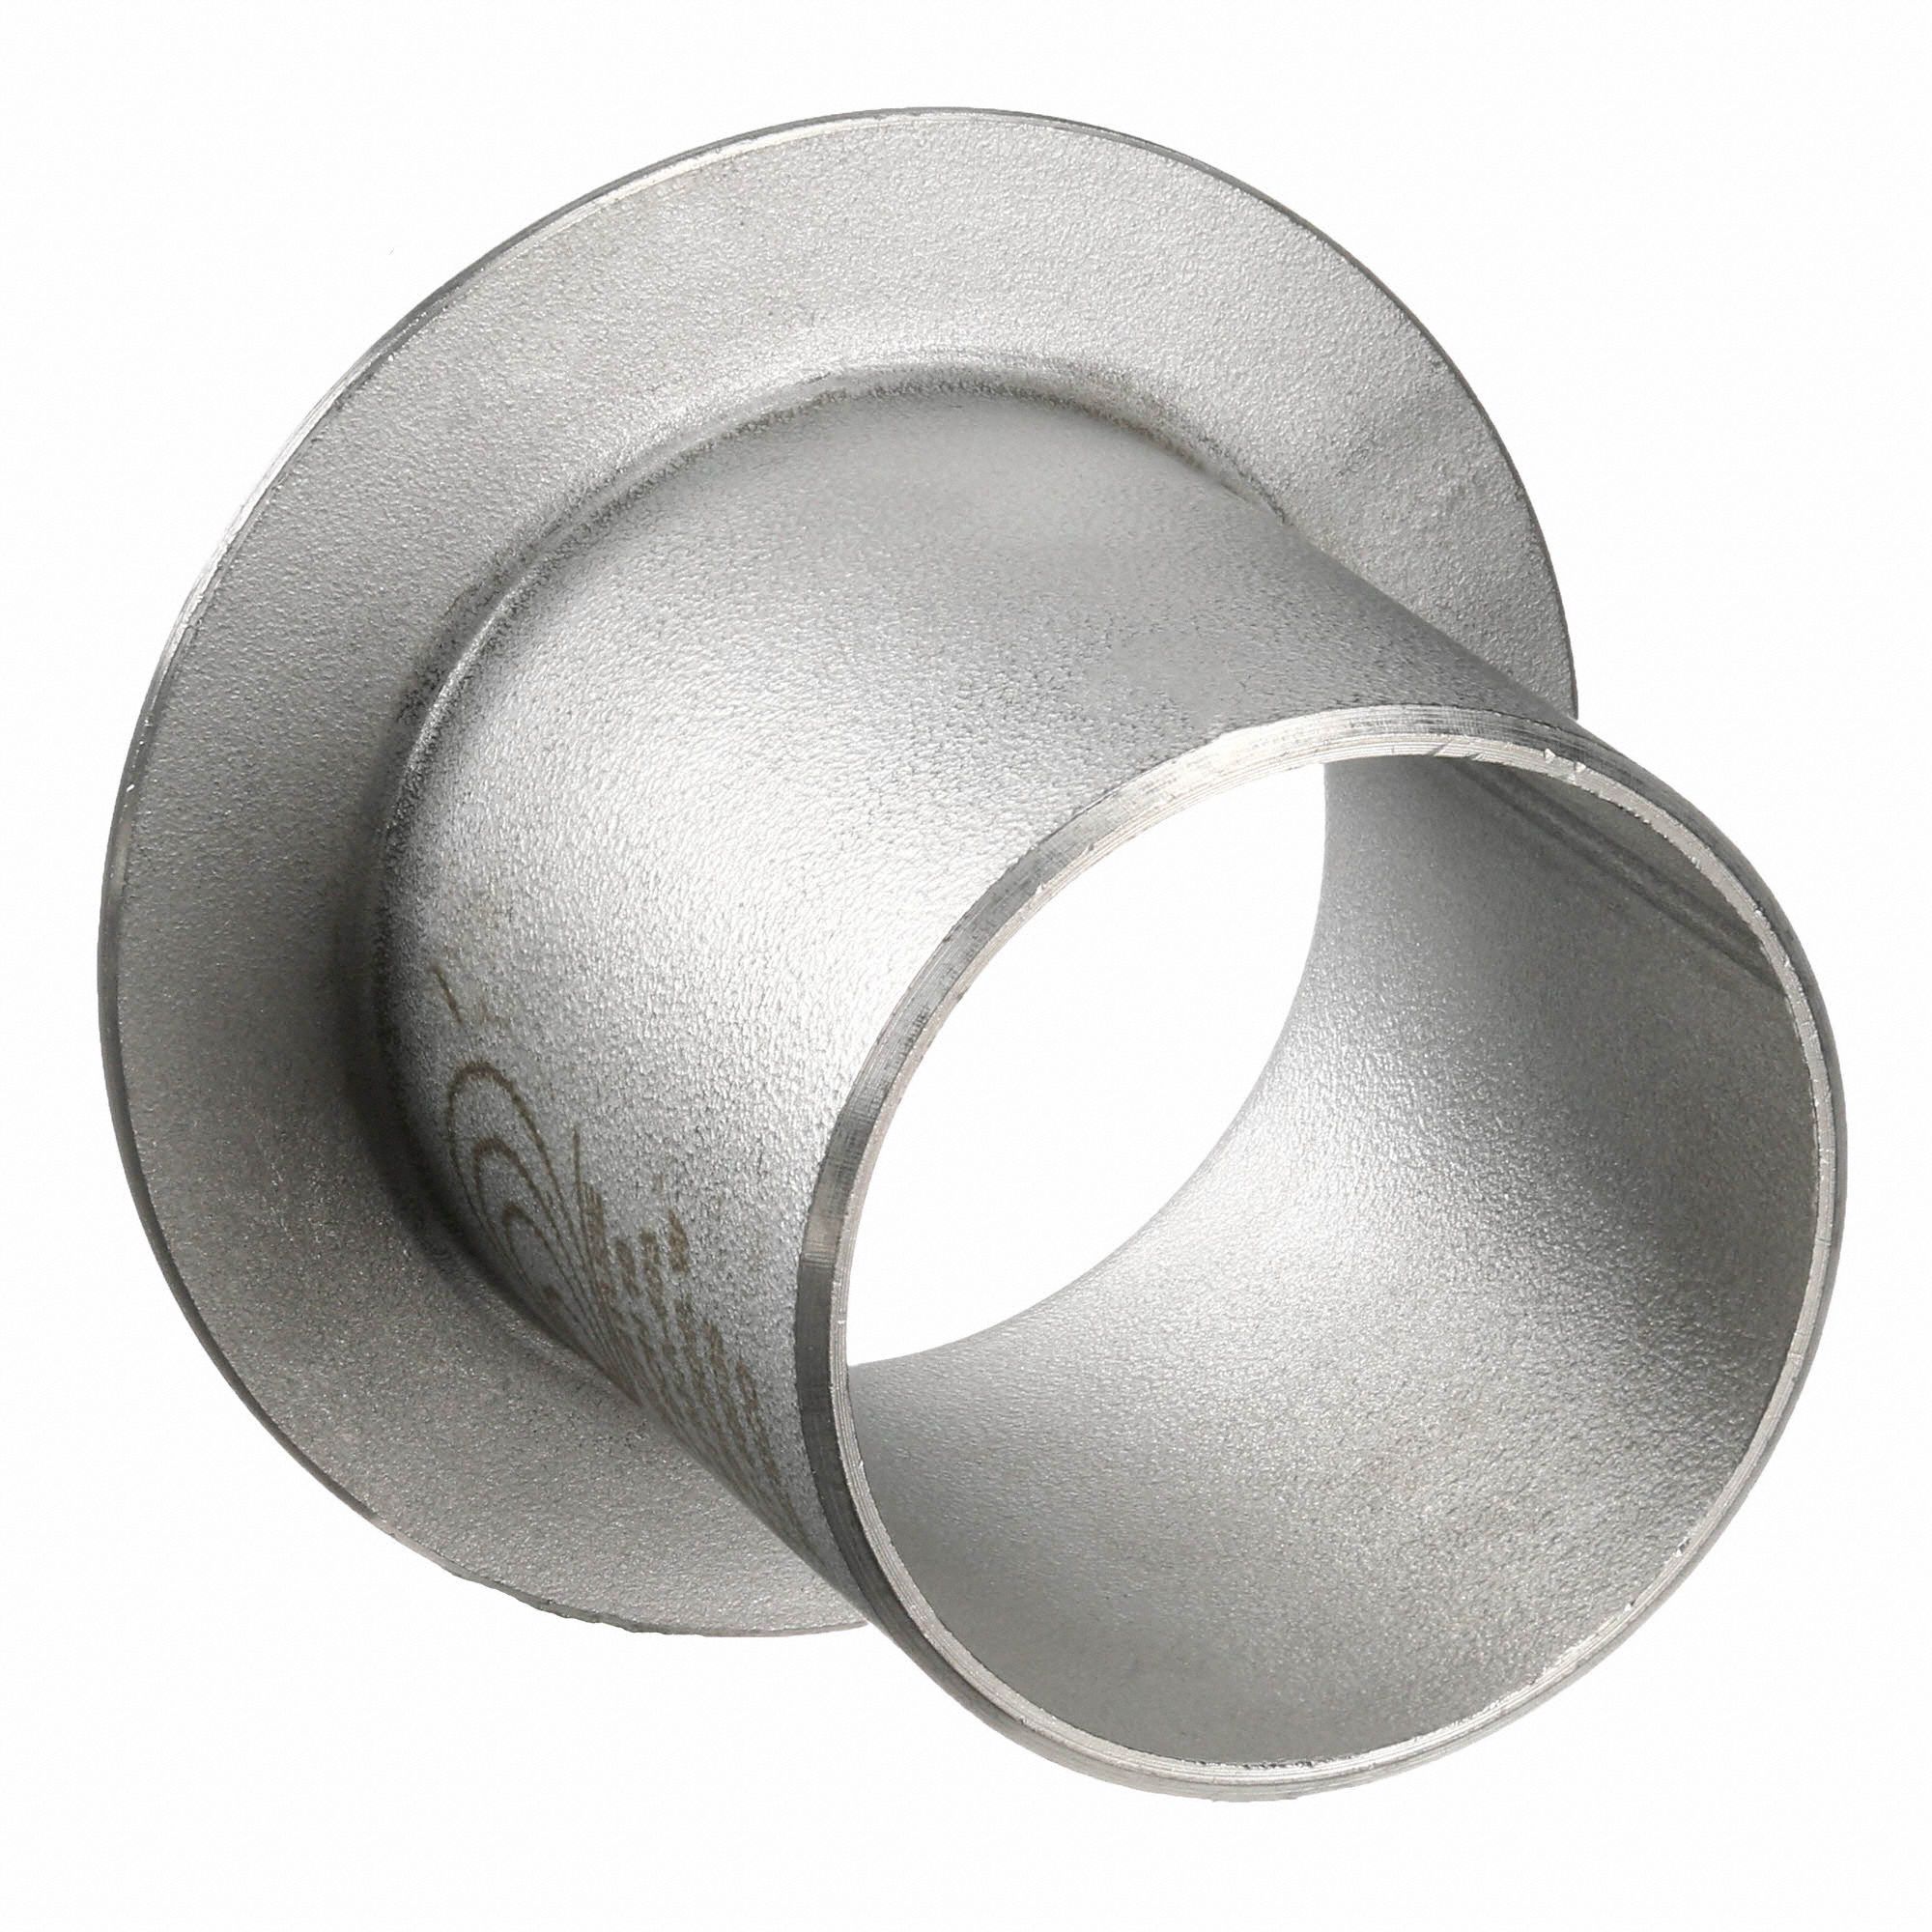 Smith Cooper 304l Stainless Steel Stub End Type C 3 In Pipe Size Pipe Fitting Schedule 10 5326